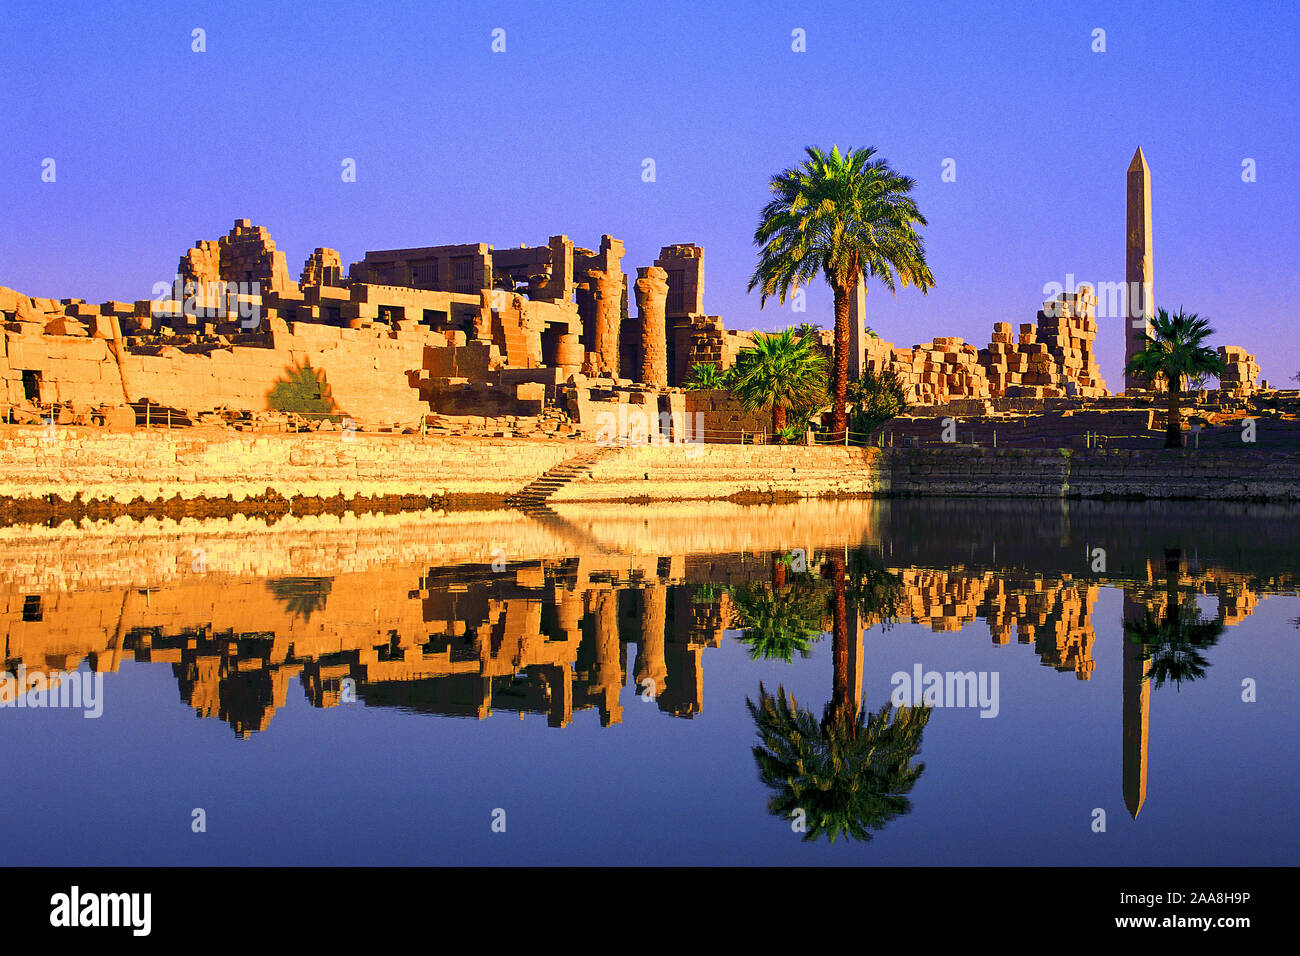 Palm trees grow beside the cistern, obelisk, columns and other remains at temple of Karnak, Luxor, Egypt Stock Photo